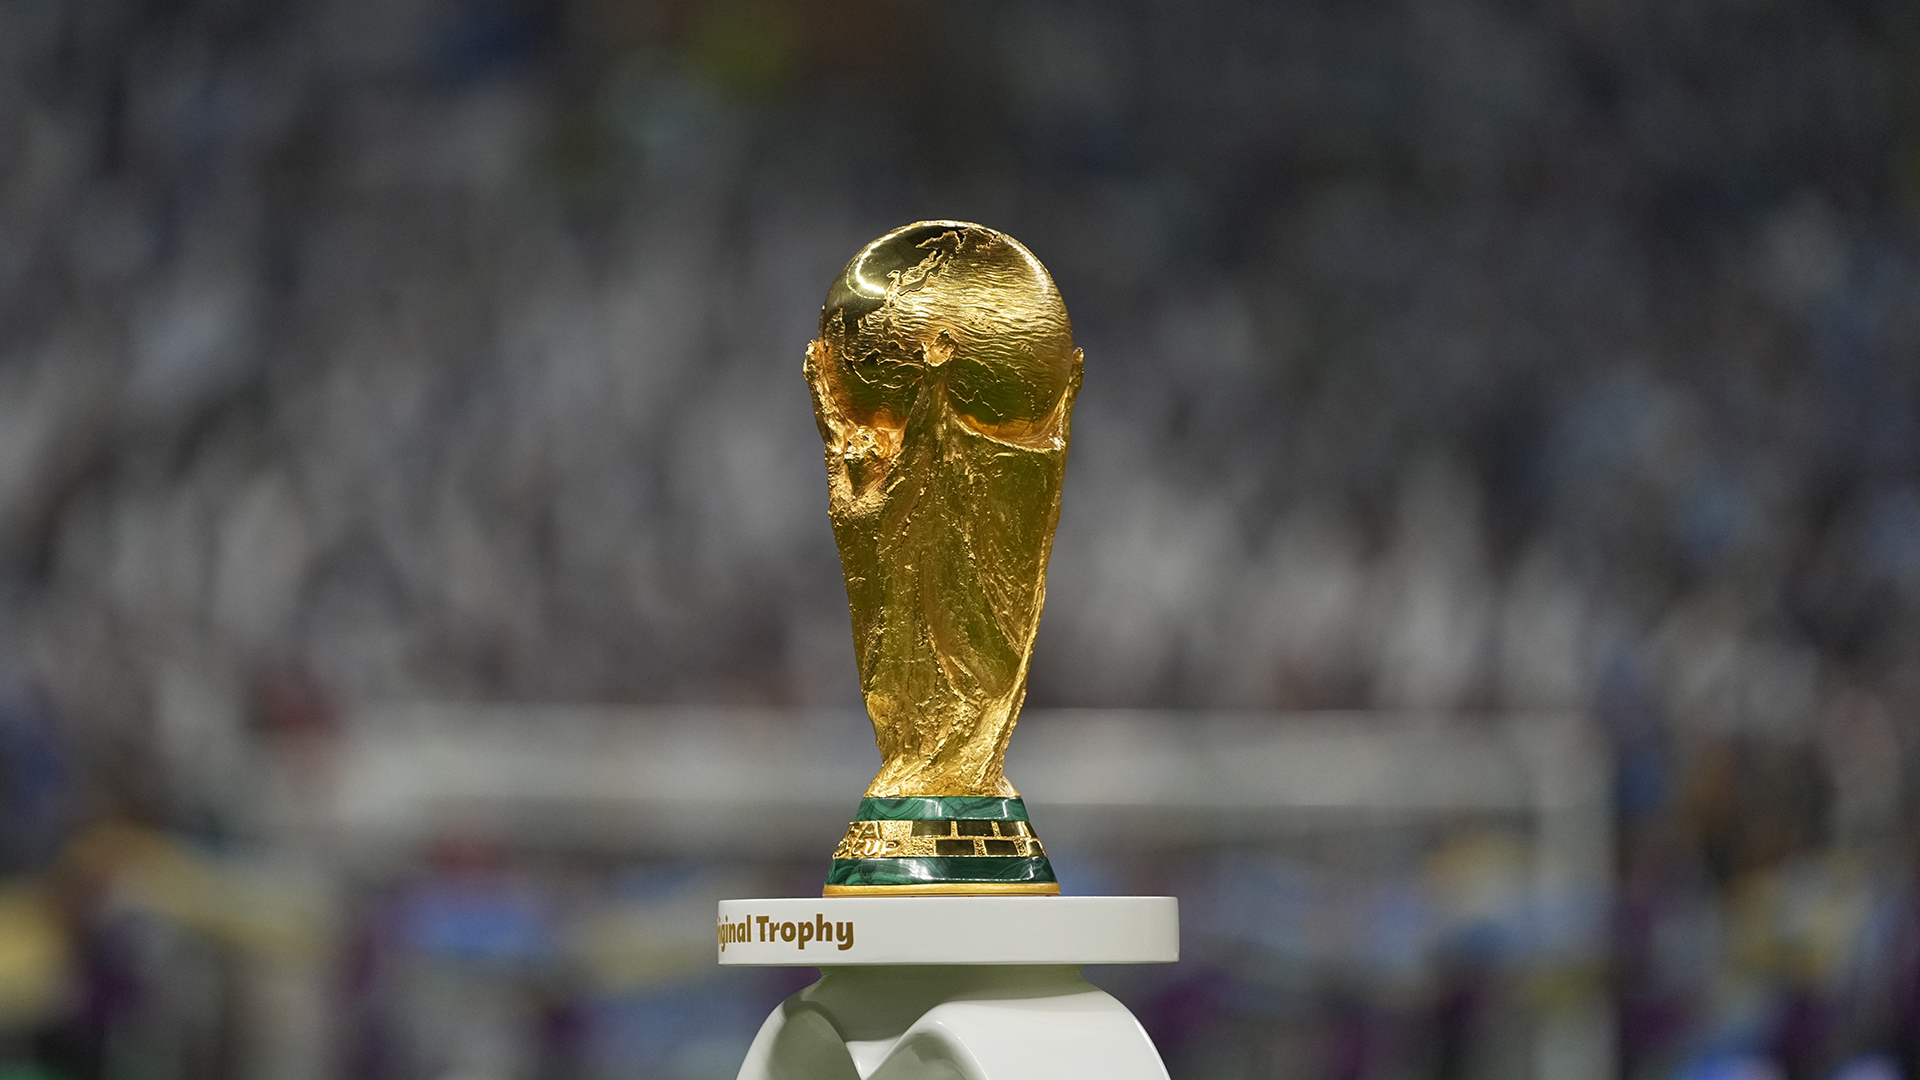 World Cup trophy prior to the FIFA World Cup Qatar 2022 Final match between Argentina and France at Lusail Stadium on December 18, 2022 in Lusail City, Qatar.